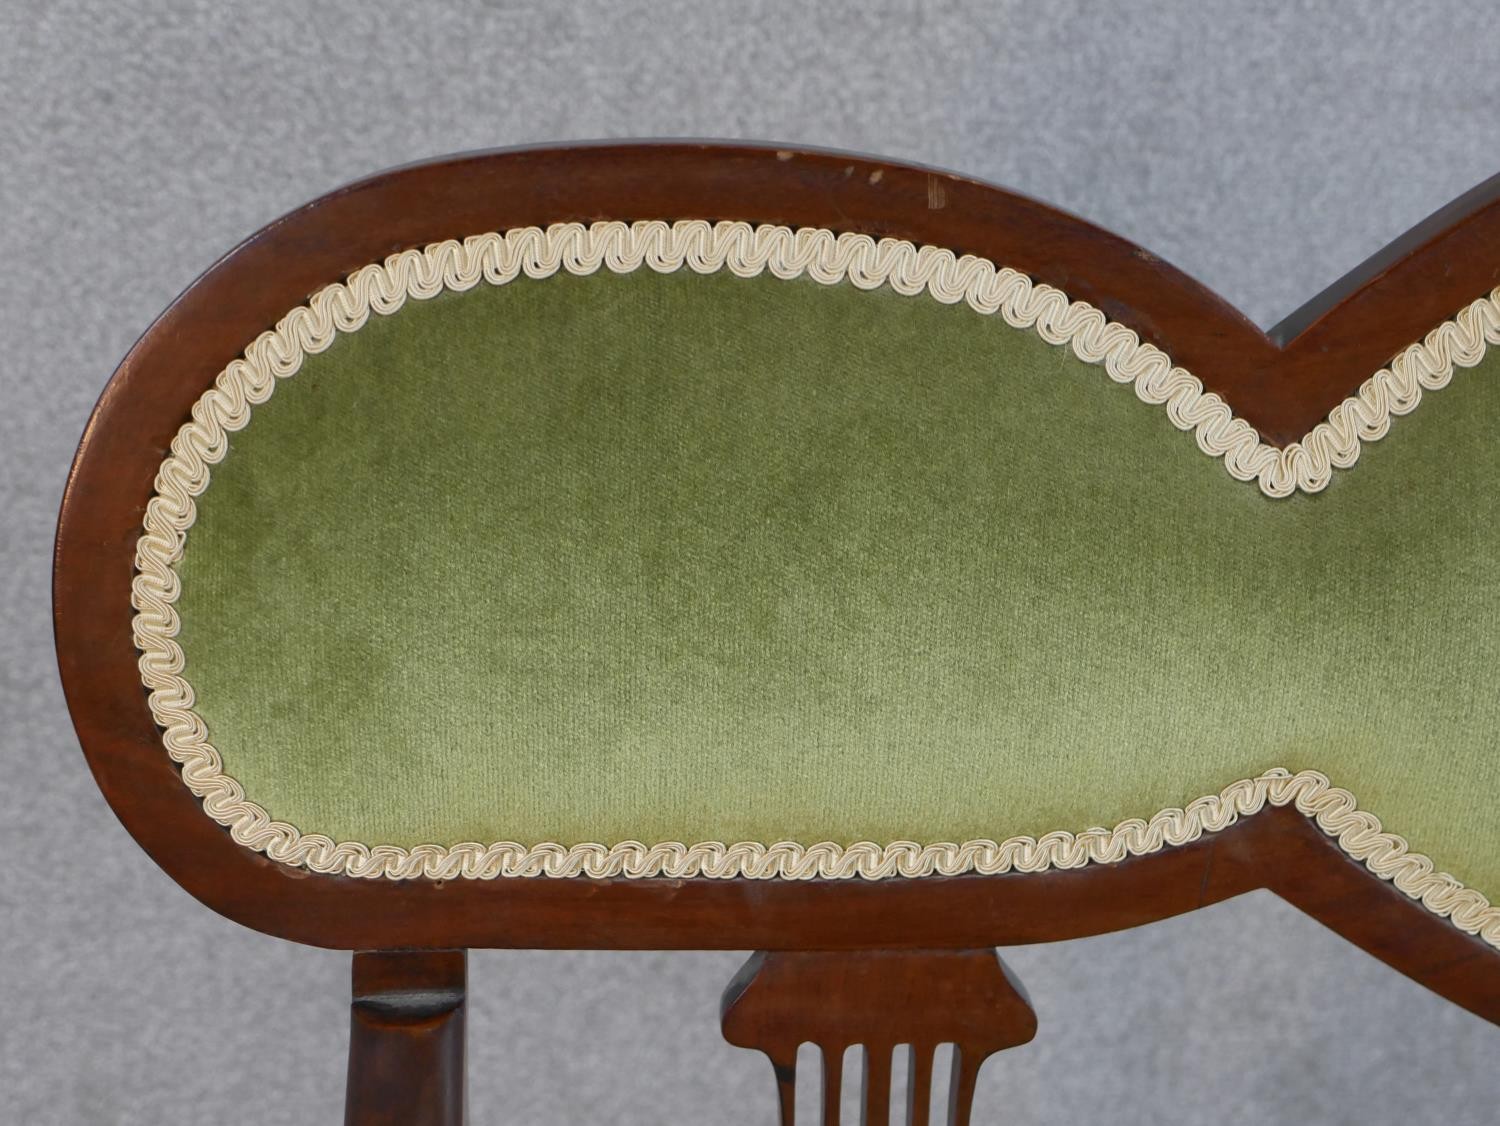 An Edwardian mahogany framed open arm settee with pierced splat back, with green upholstered seat - Image 6 of 7